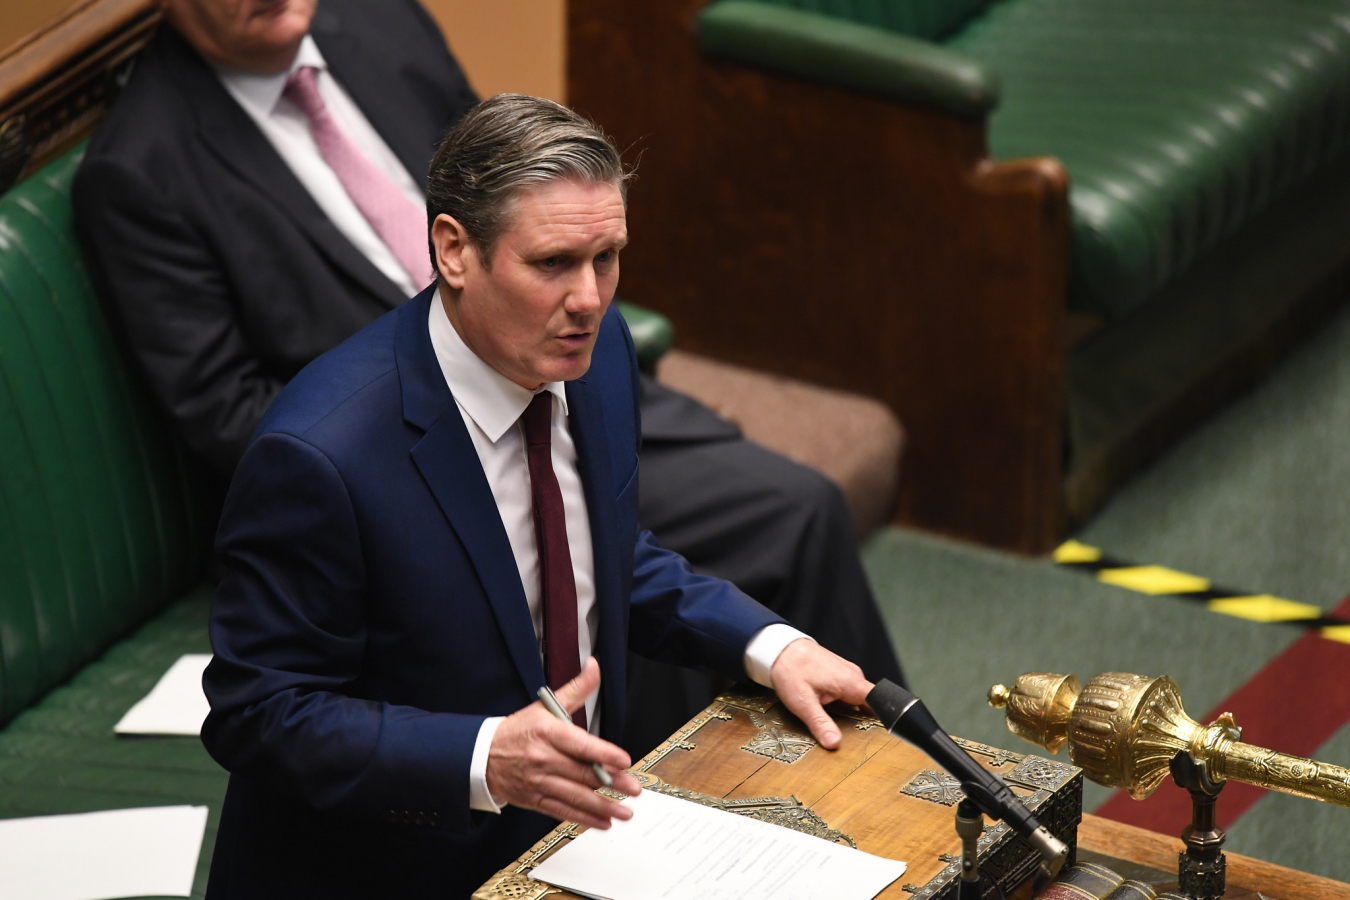 Sir Keir Starmer, Leader of Labour Party 22 April 2020